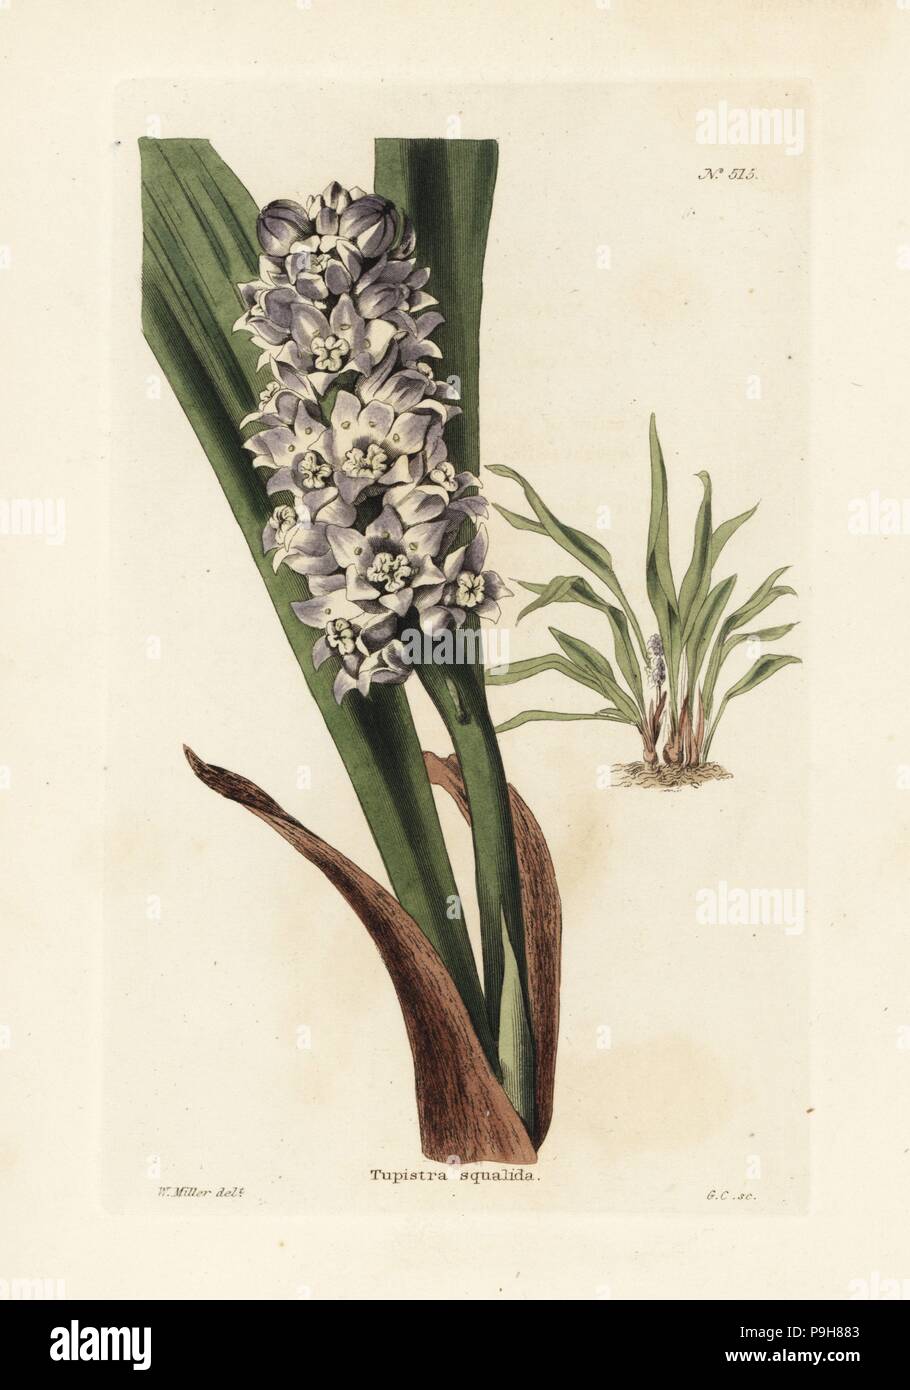 Tupistra squalida. Handcoloured copperplate engraving by George Cooke after an illustration by William Miller from Conrad Loddiges' Botanical Cabinet, Hackney, London, 1821. Stock Photo